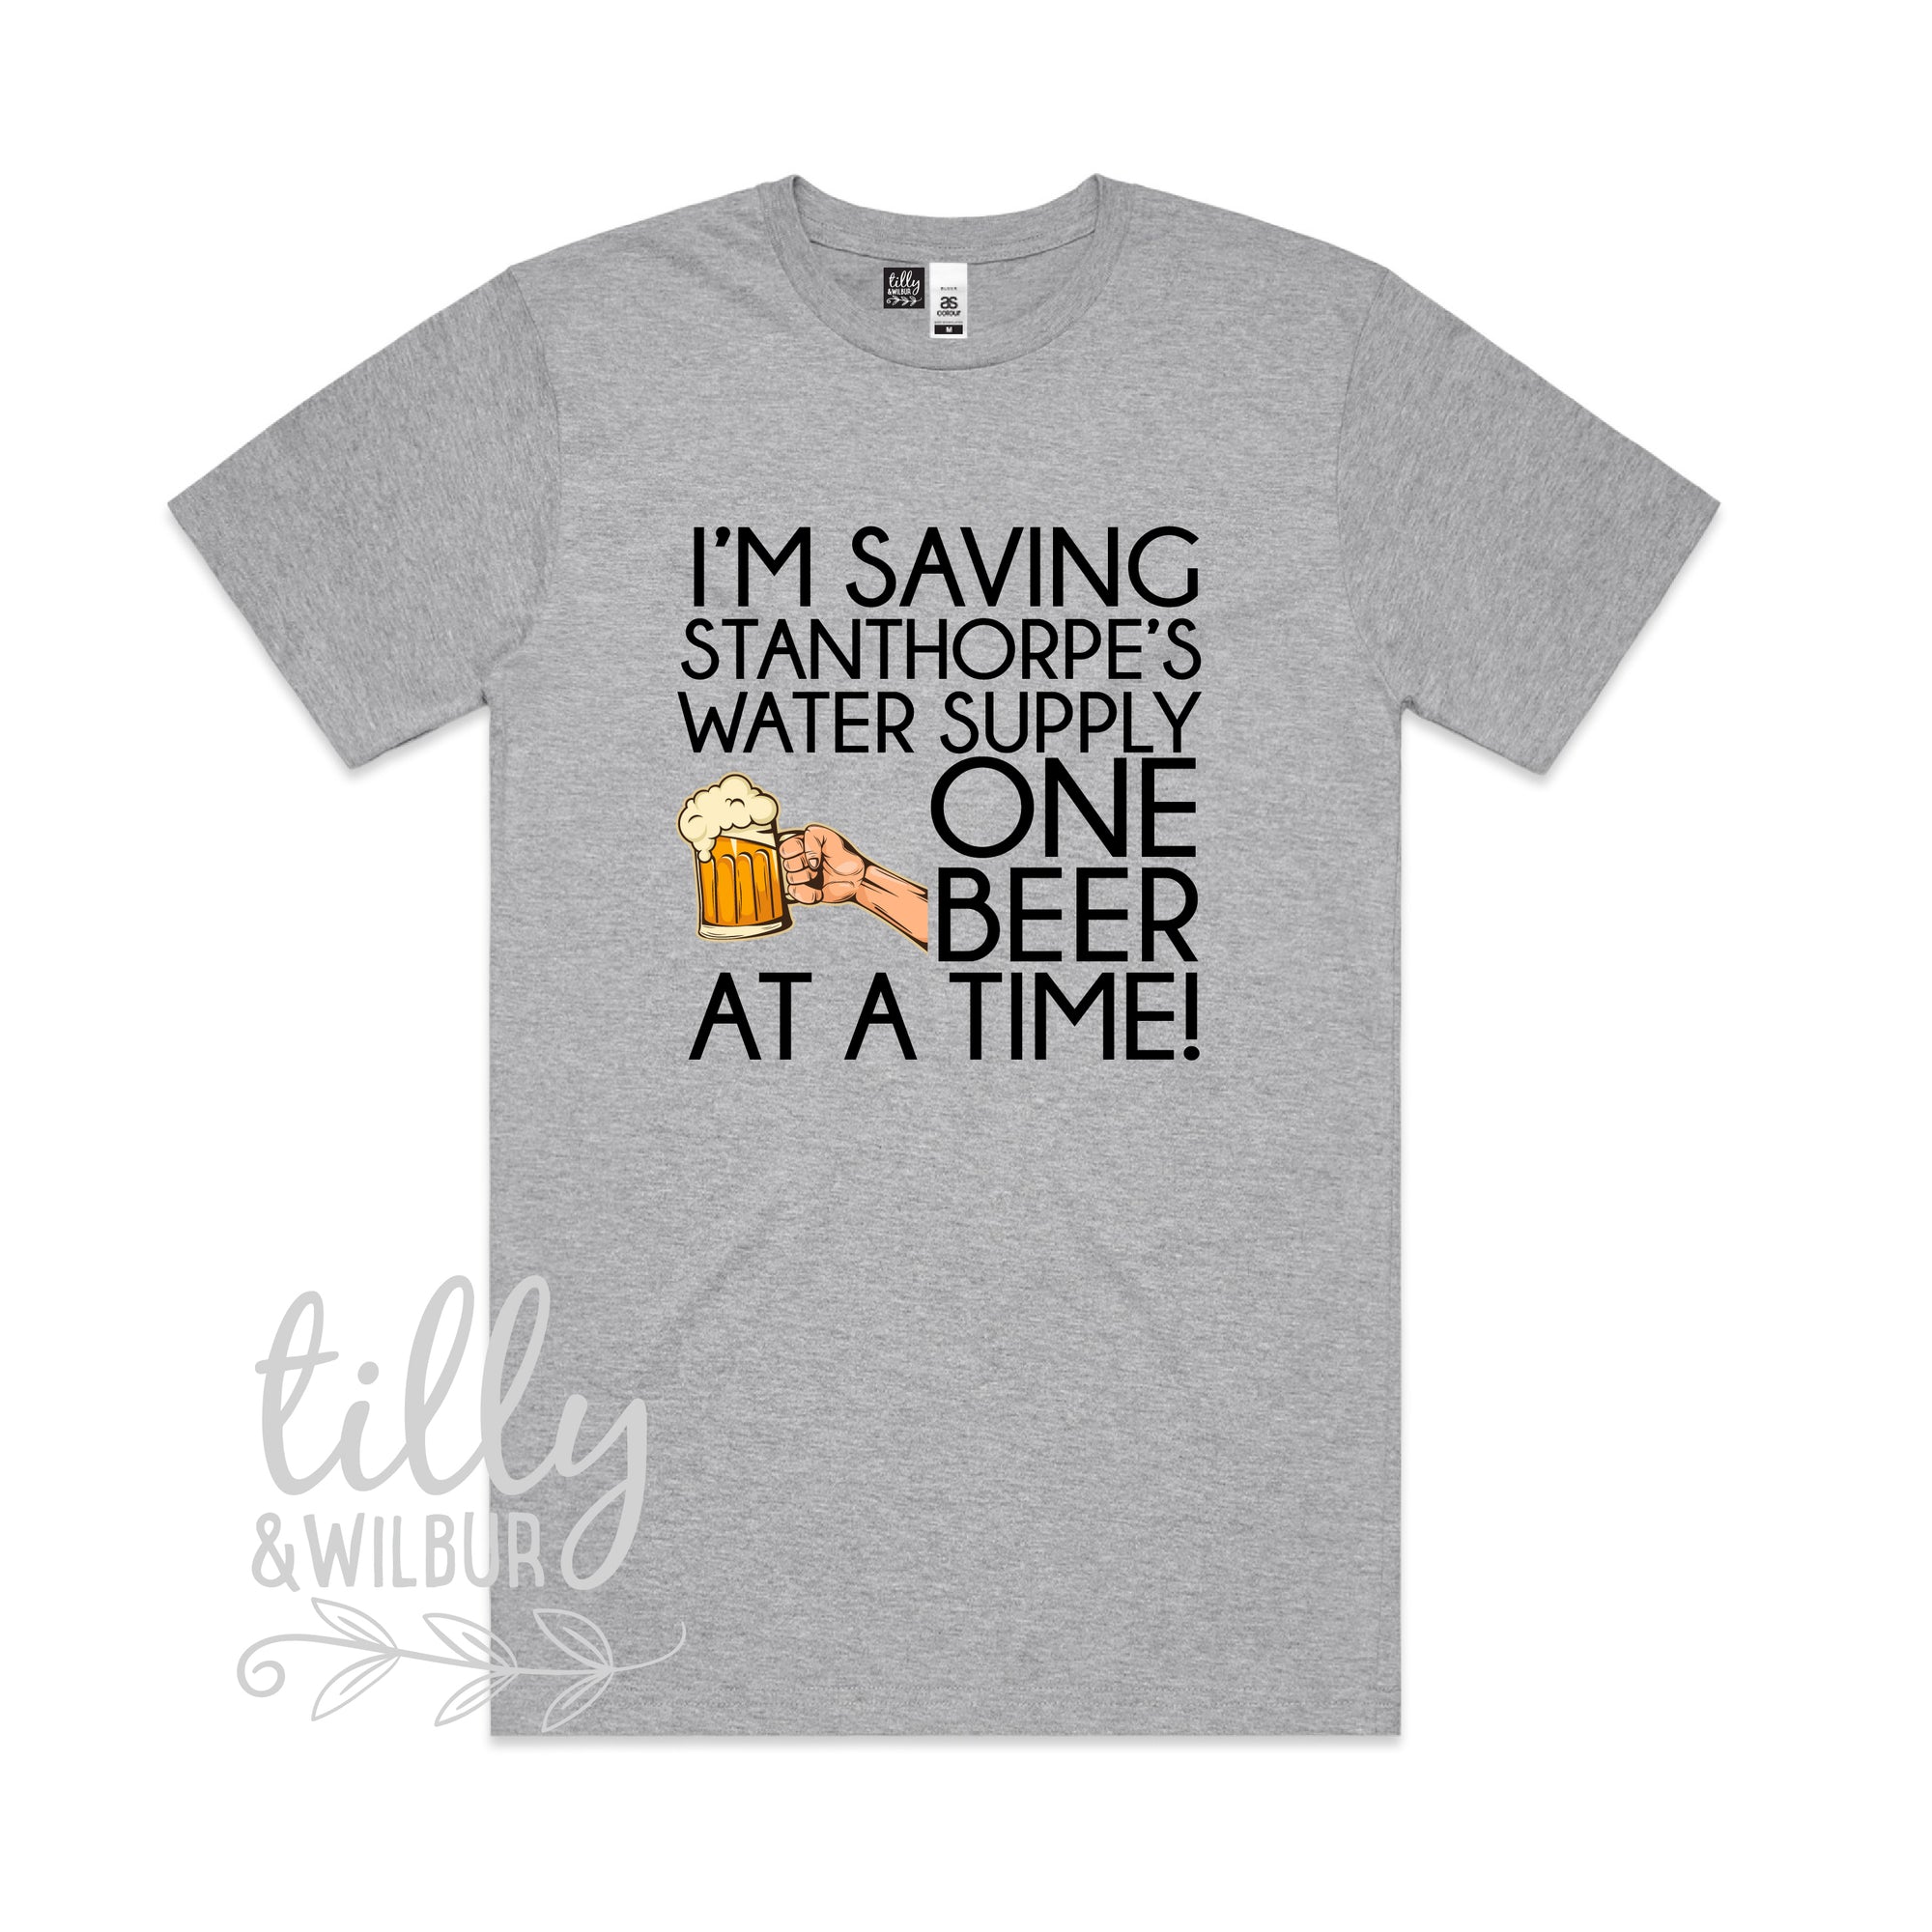 I'm Saving Stanthorpe's Water Supply One Beer At A Time Men's Tee